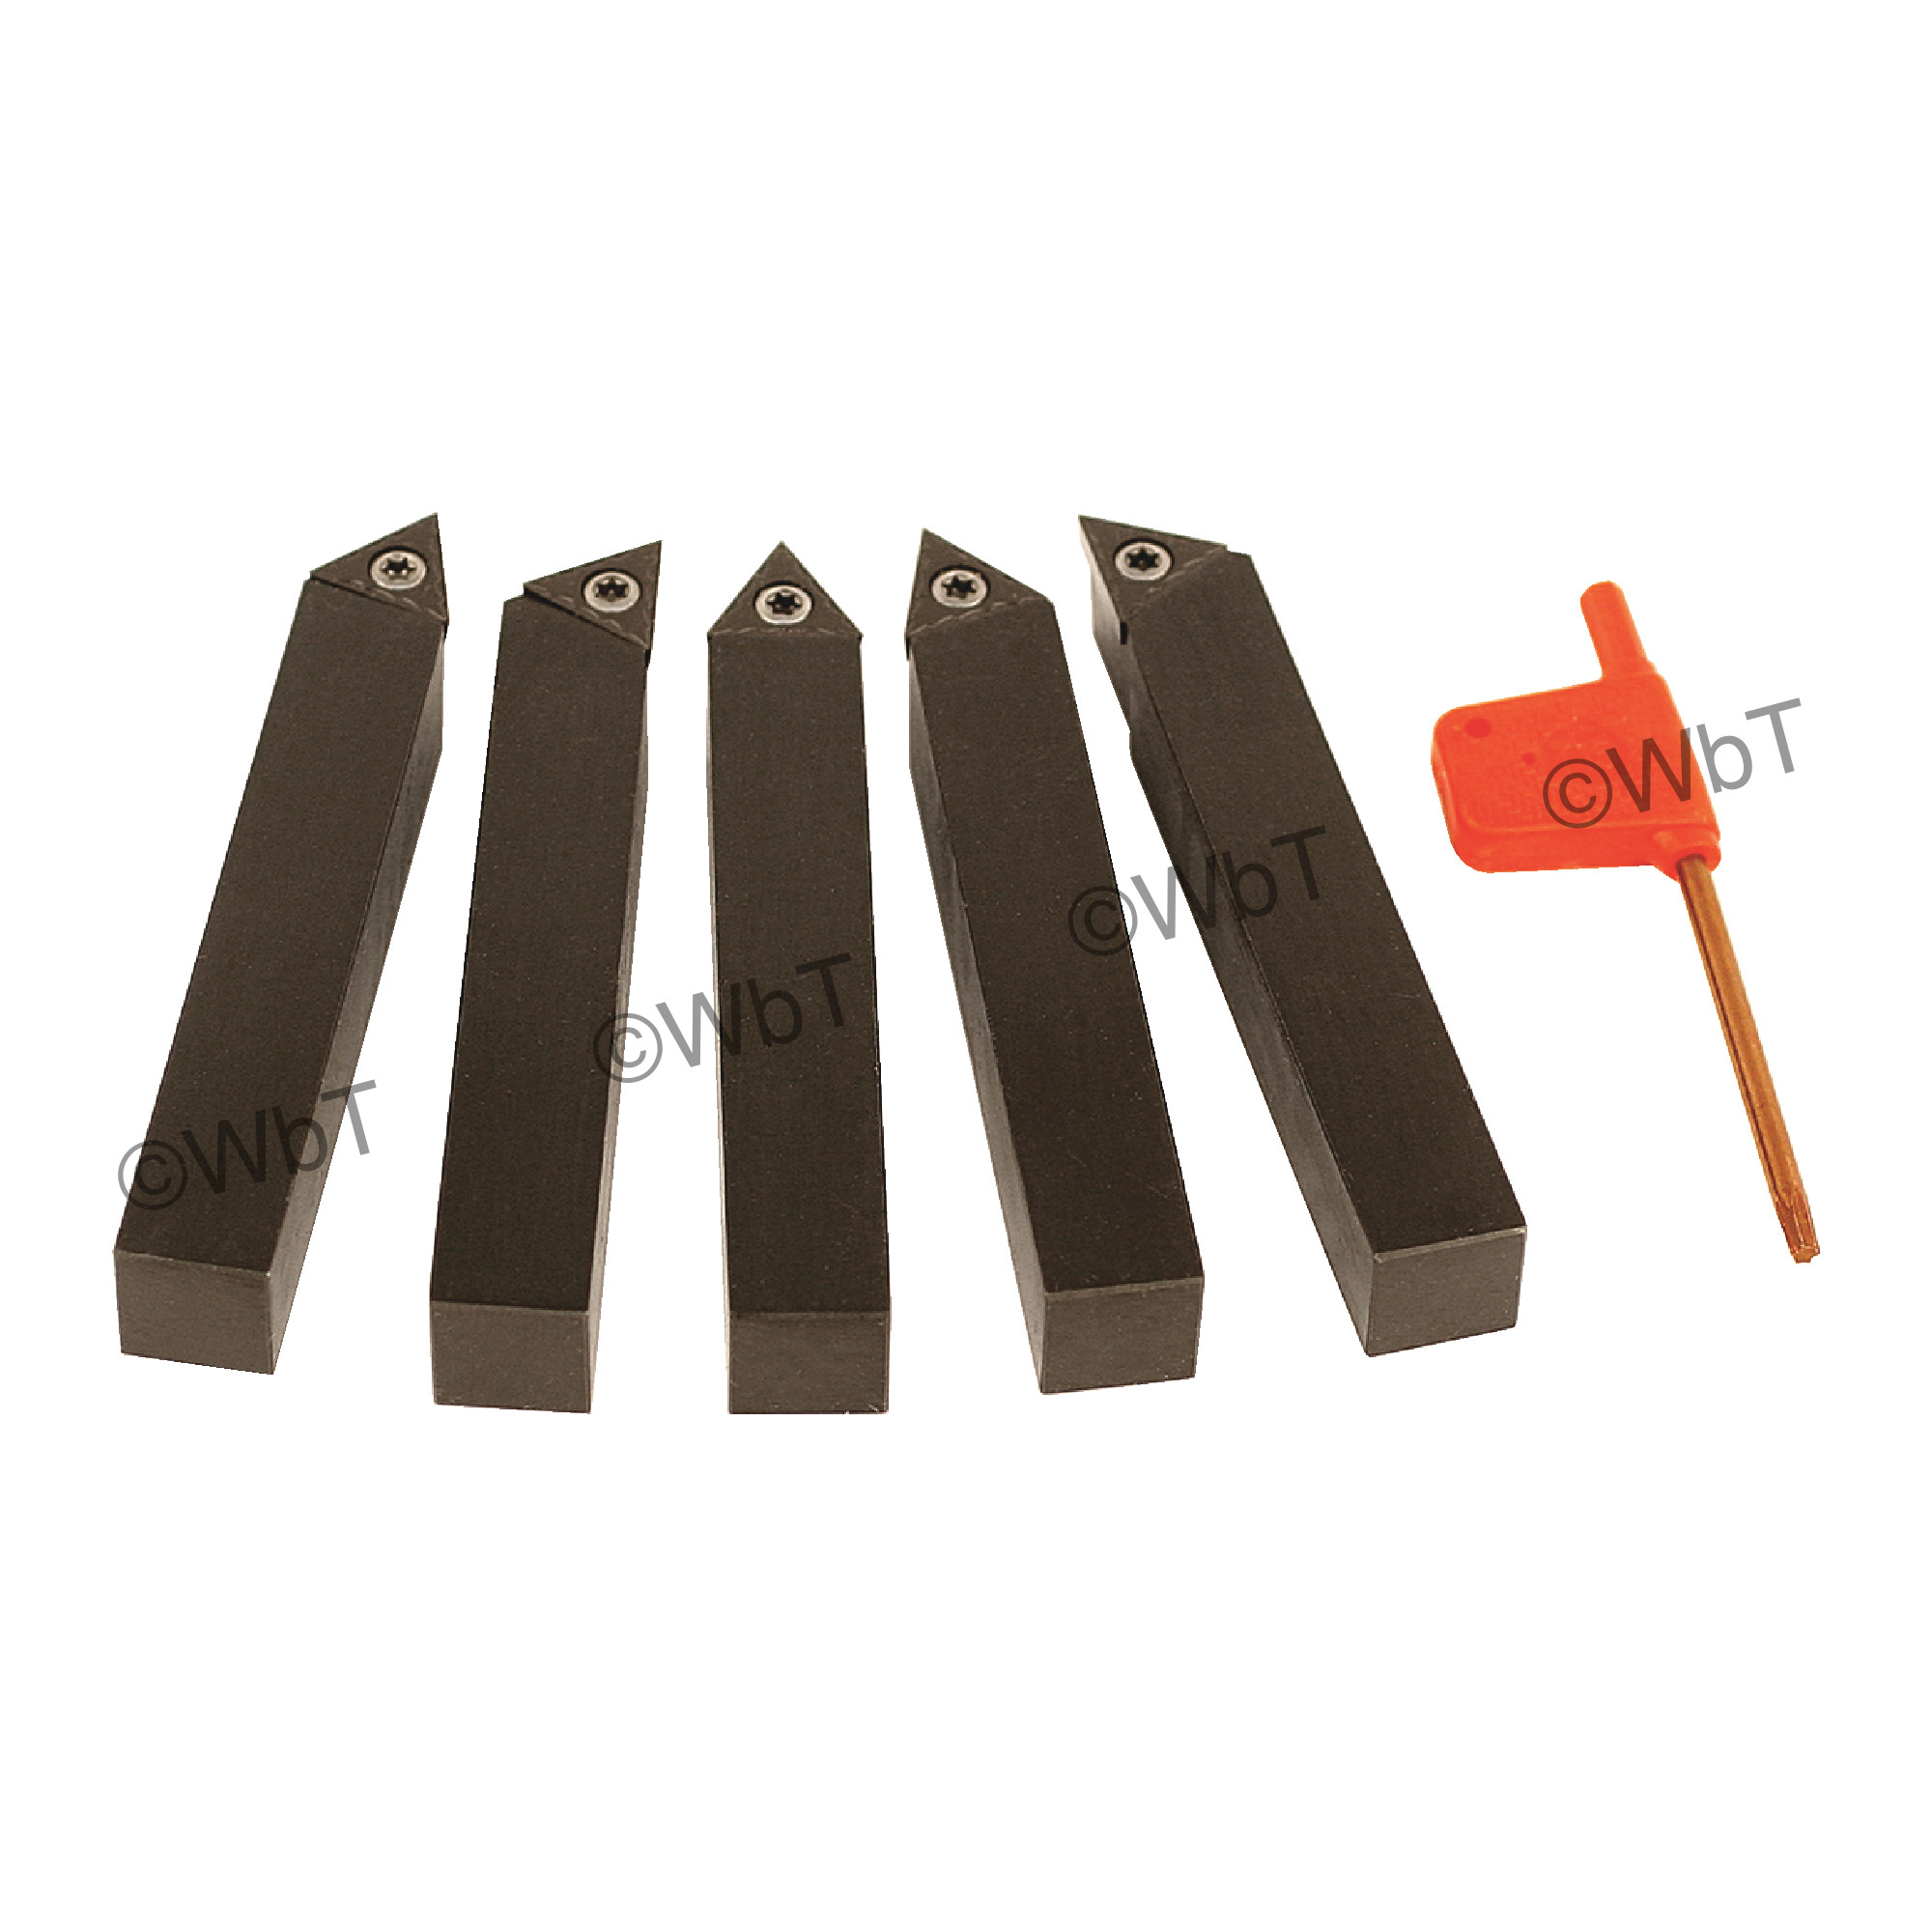 TERRA CARBIDE - 5 Piece External Turning Set with Inserts / Accepts TCMT3(2.5)_ Inserts / 5/8" Shank